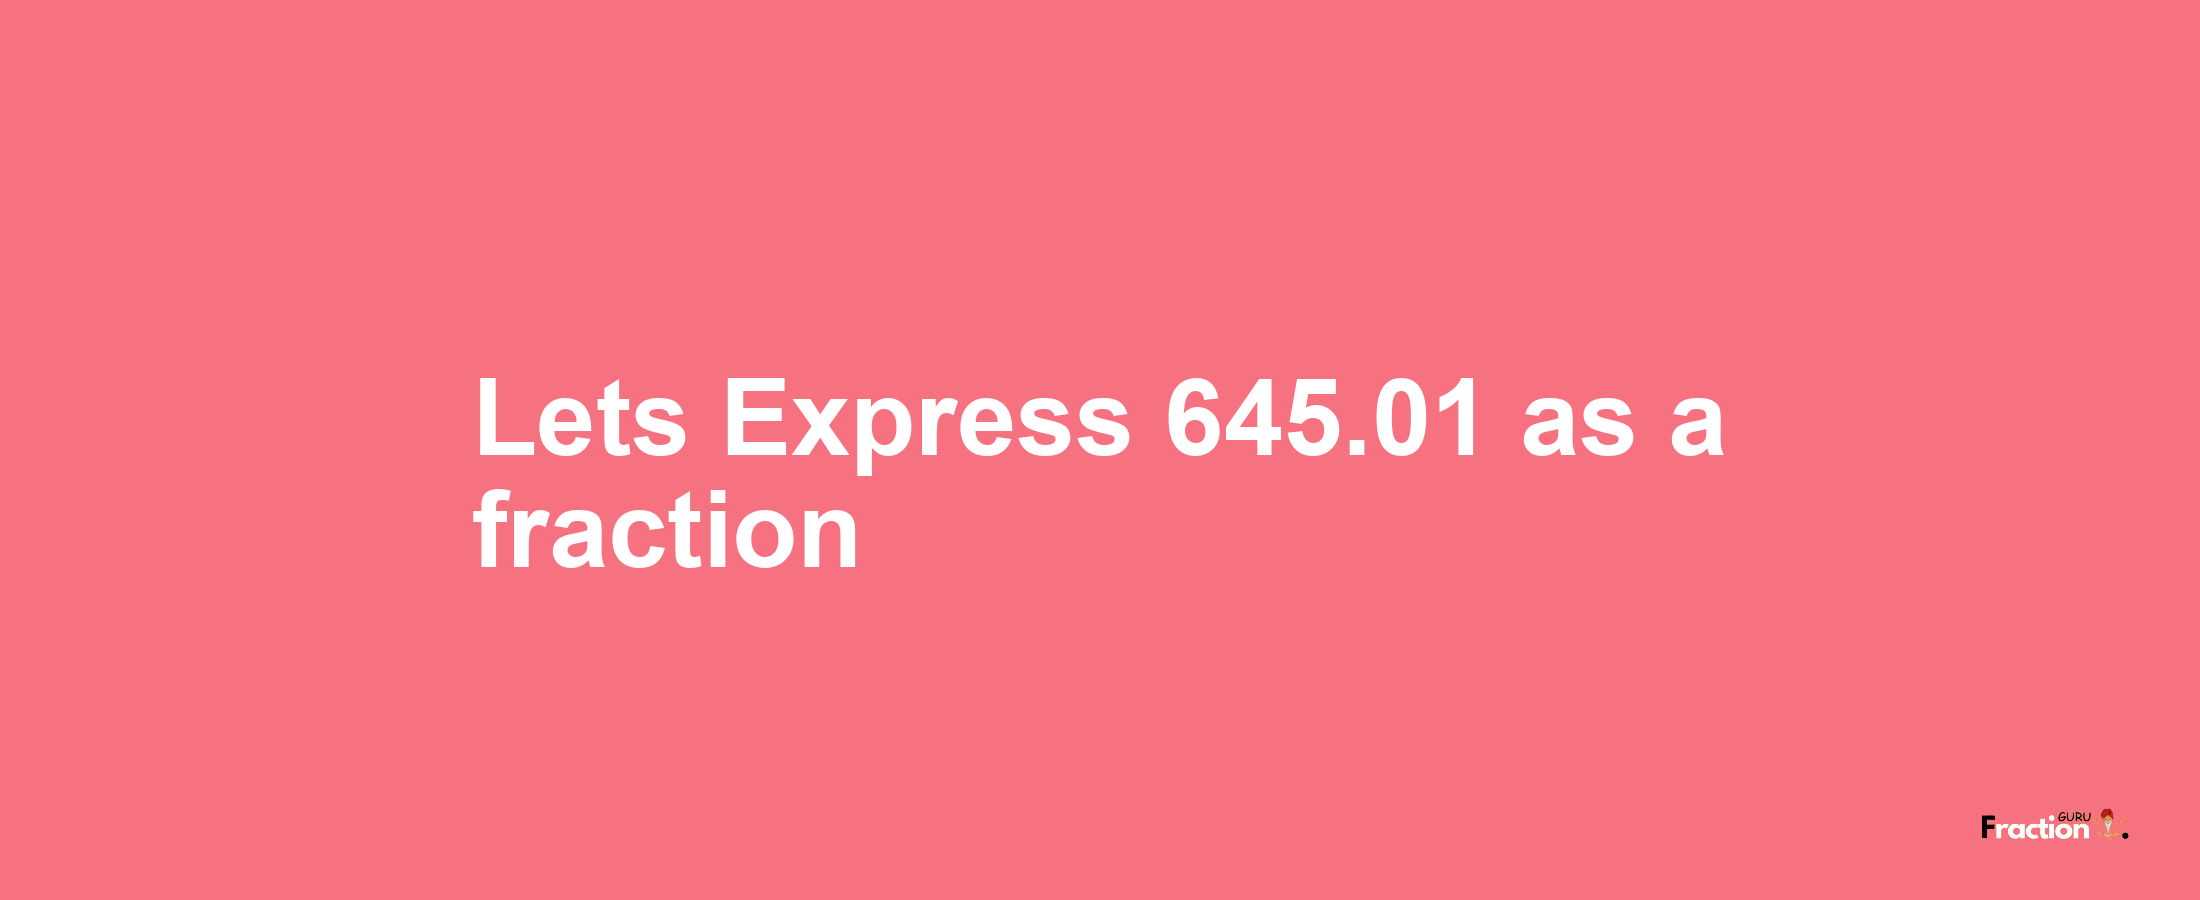 Lets Express 645.01 as afraction